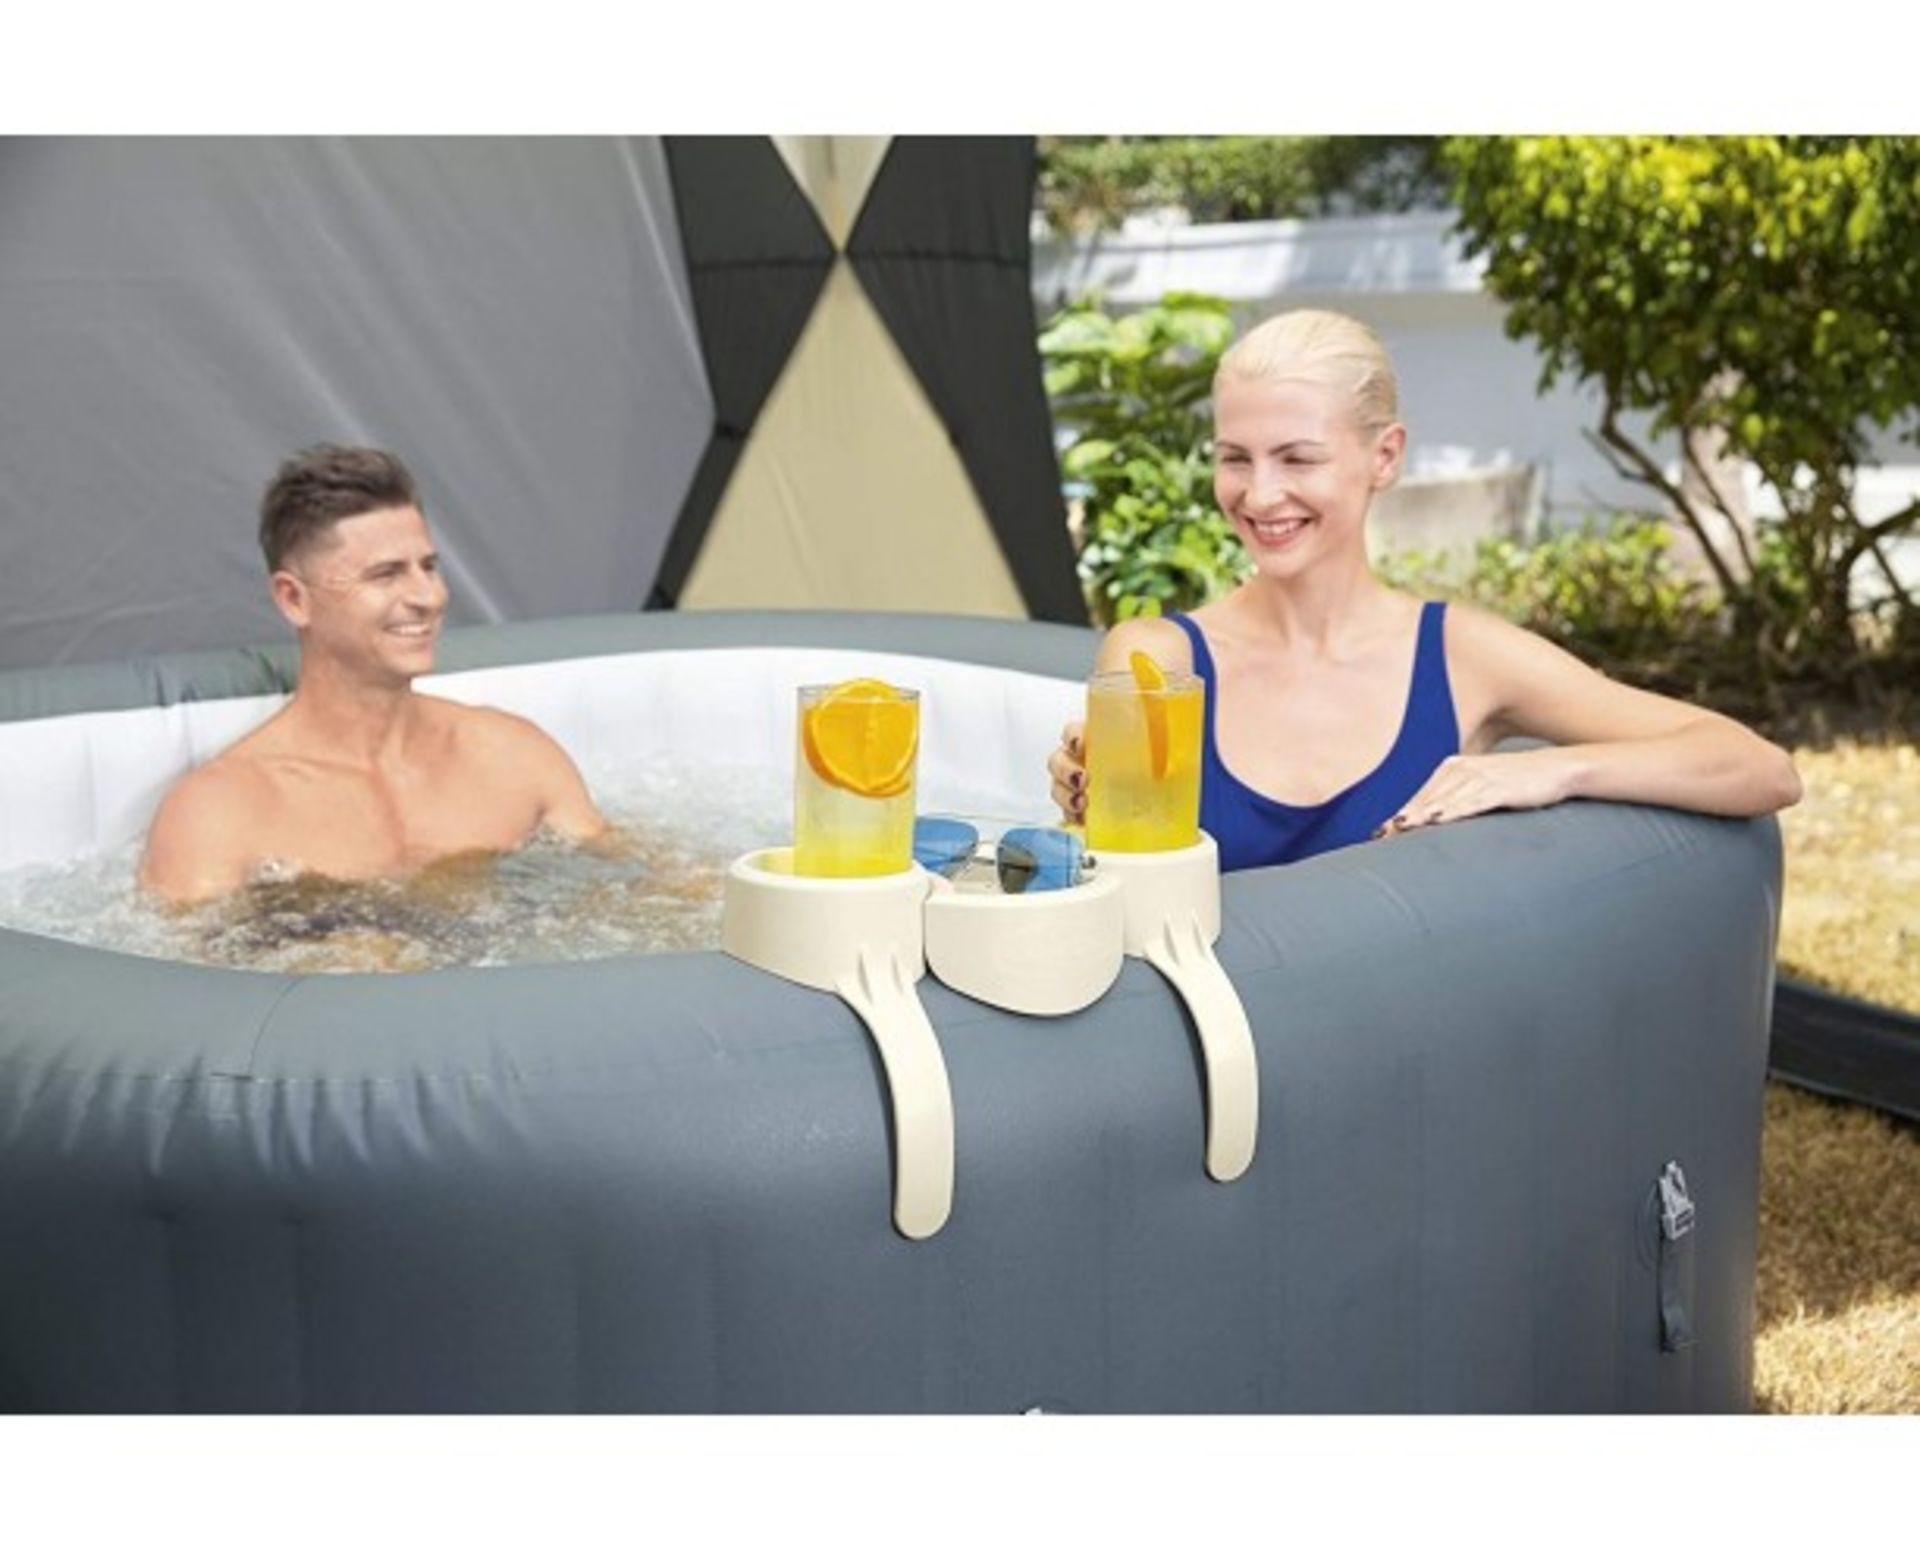 27 X BRAND NEW LAY-Z-SPA EXTRAS HOT TUB DRINKS HOLDER AND SNACK TRAY - CLIPS ON ANYWHERE ON TOP OF